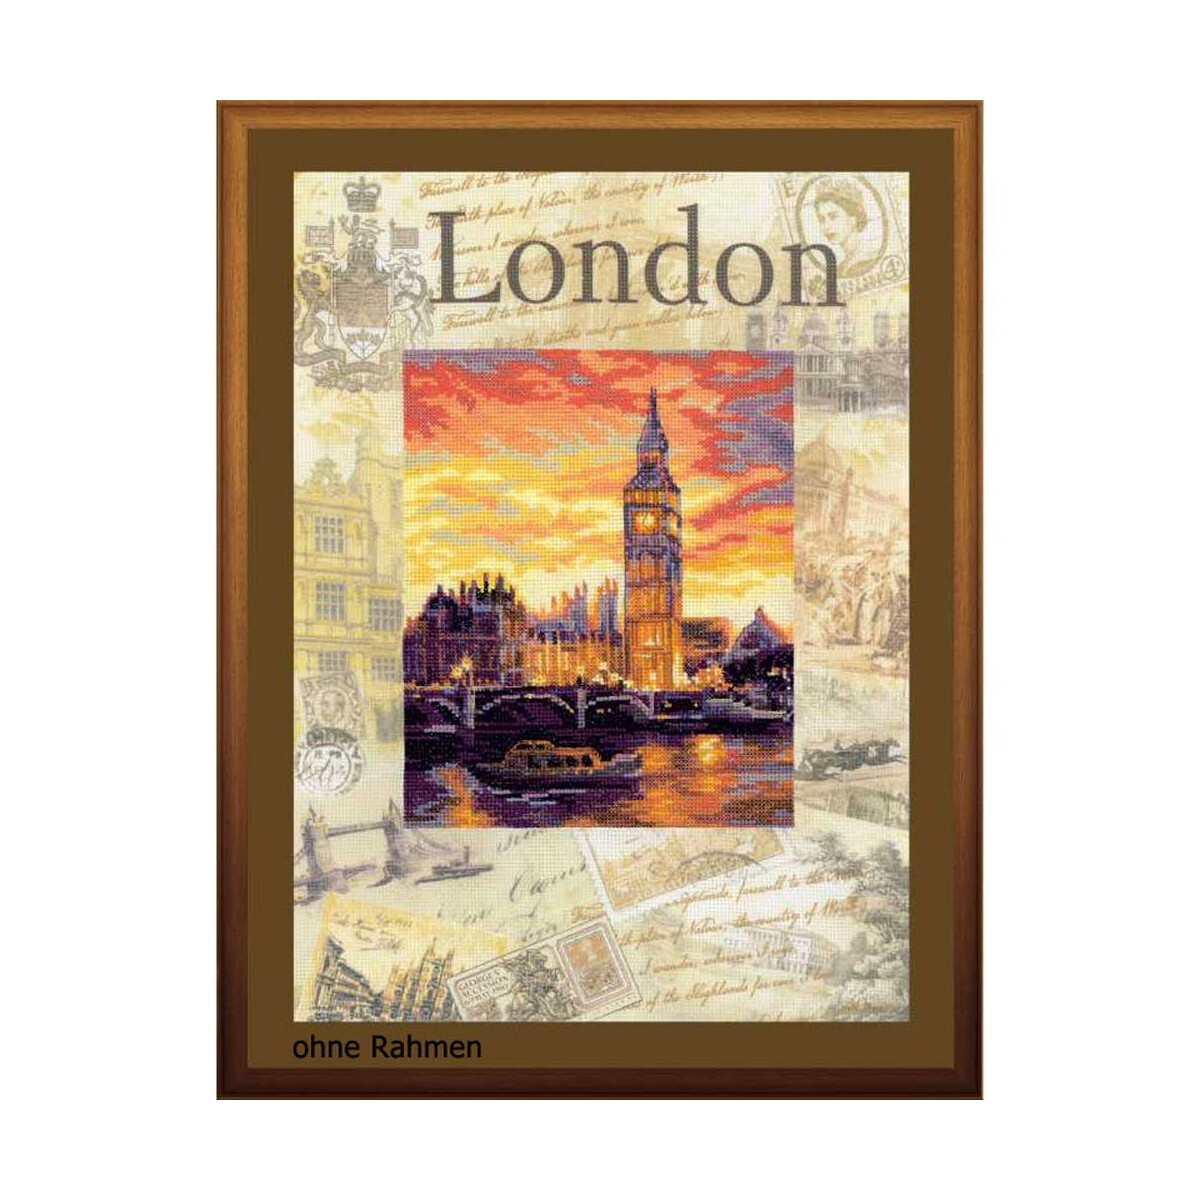 Riolis counted cross stitch Kit Cities of the World....